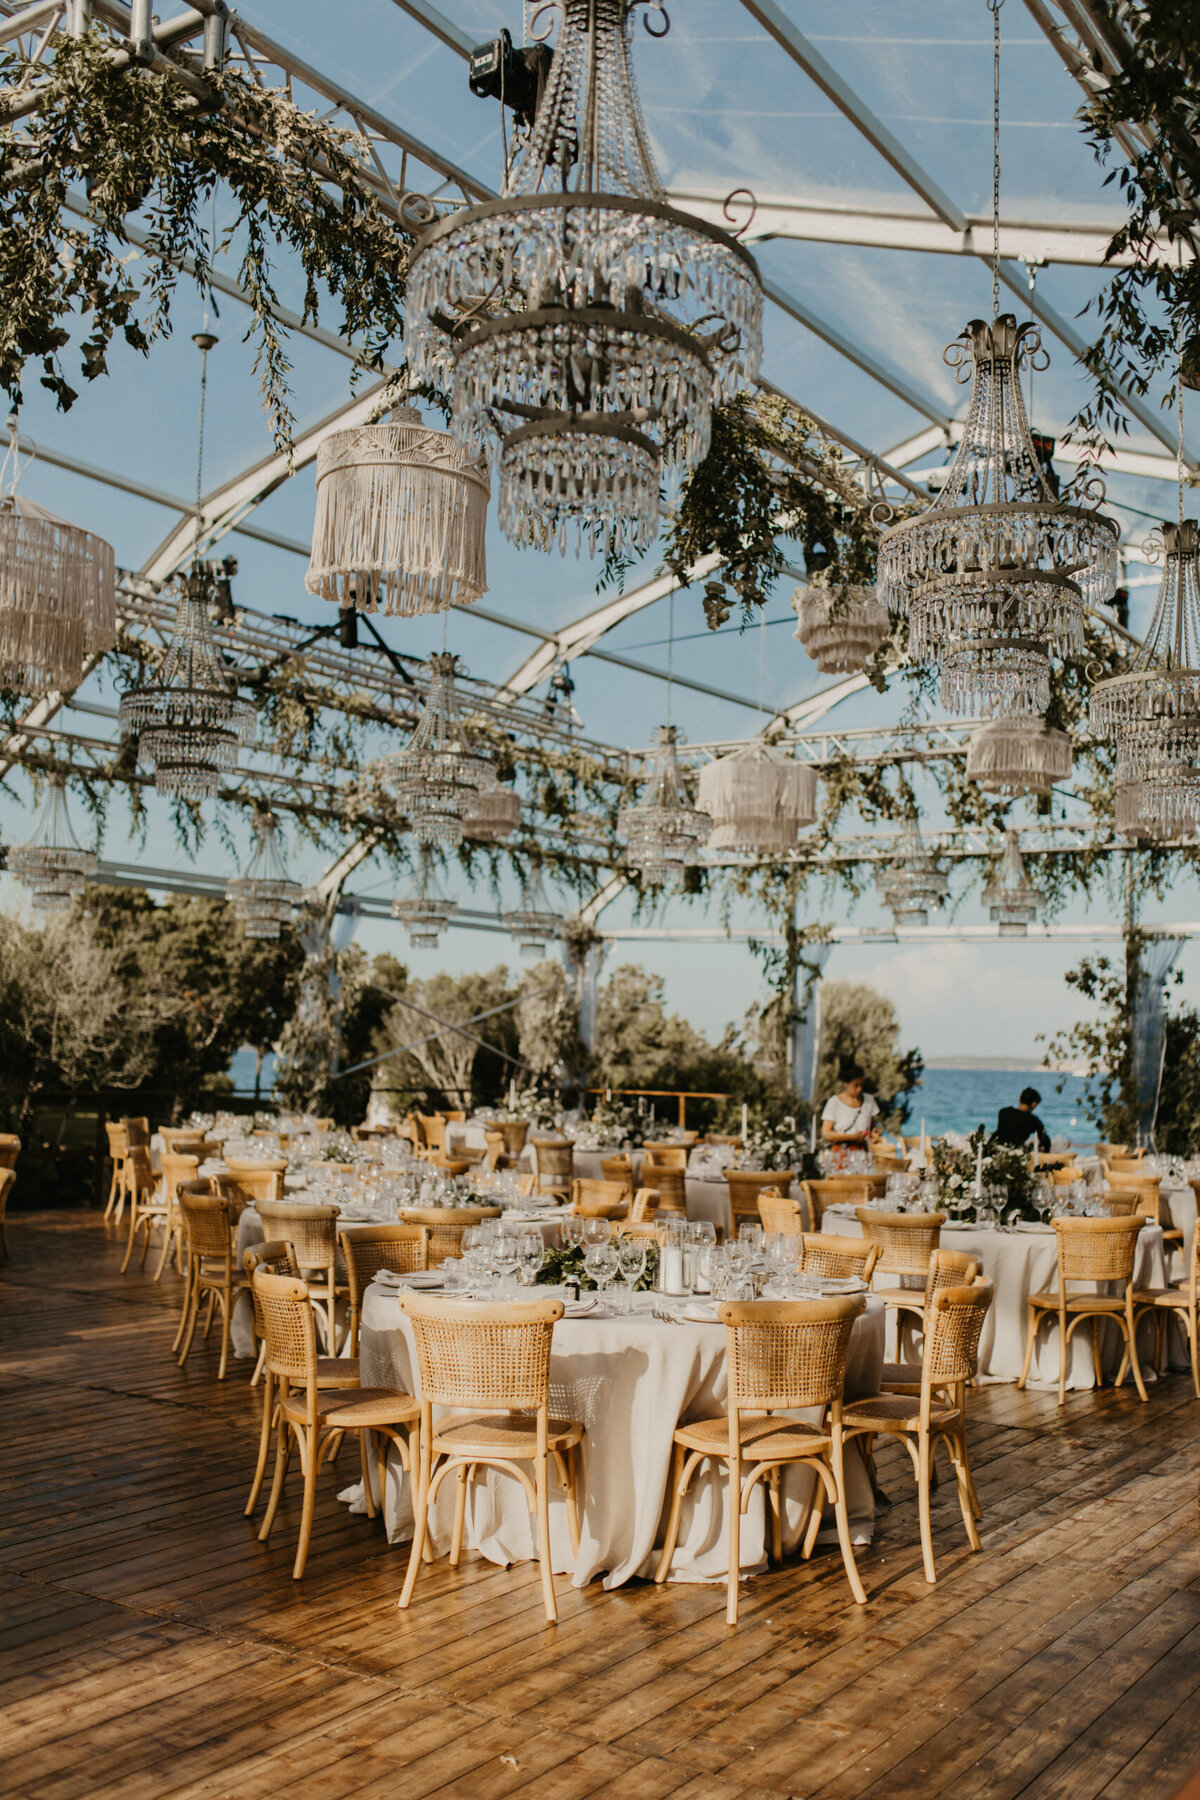 A natural chic destination wedding in sardinia by the sea